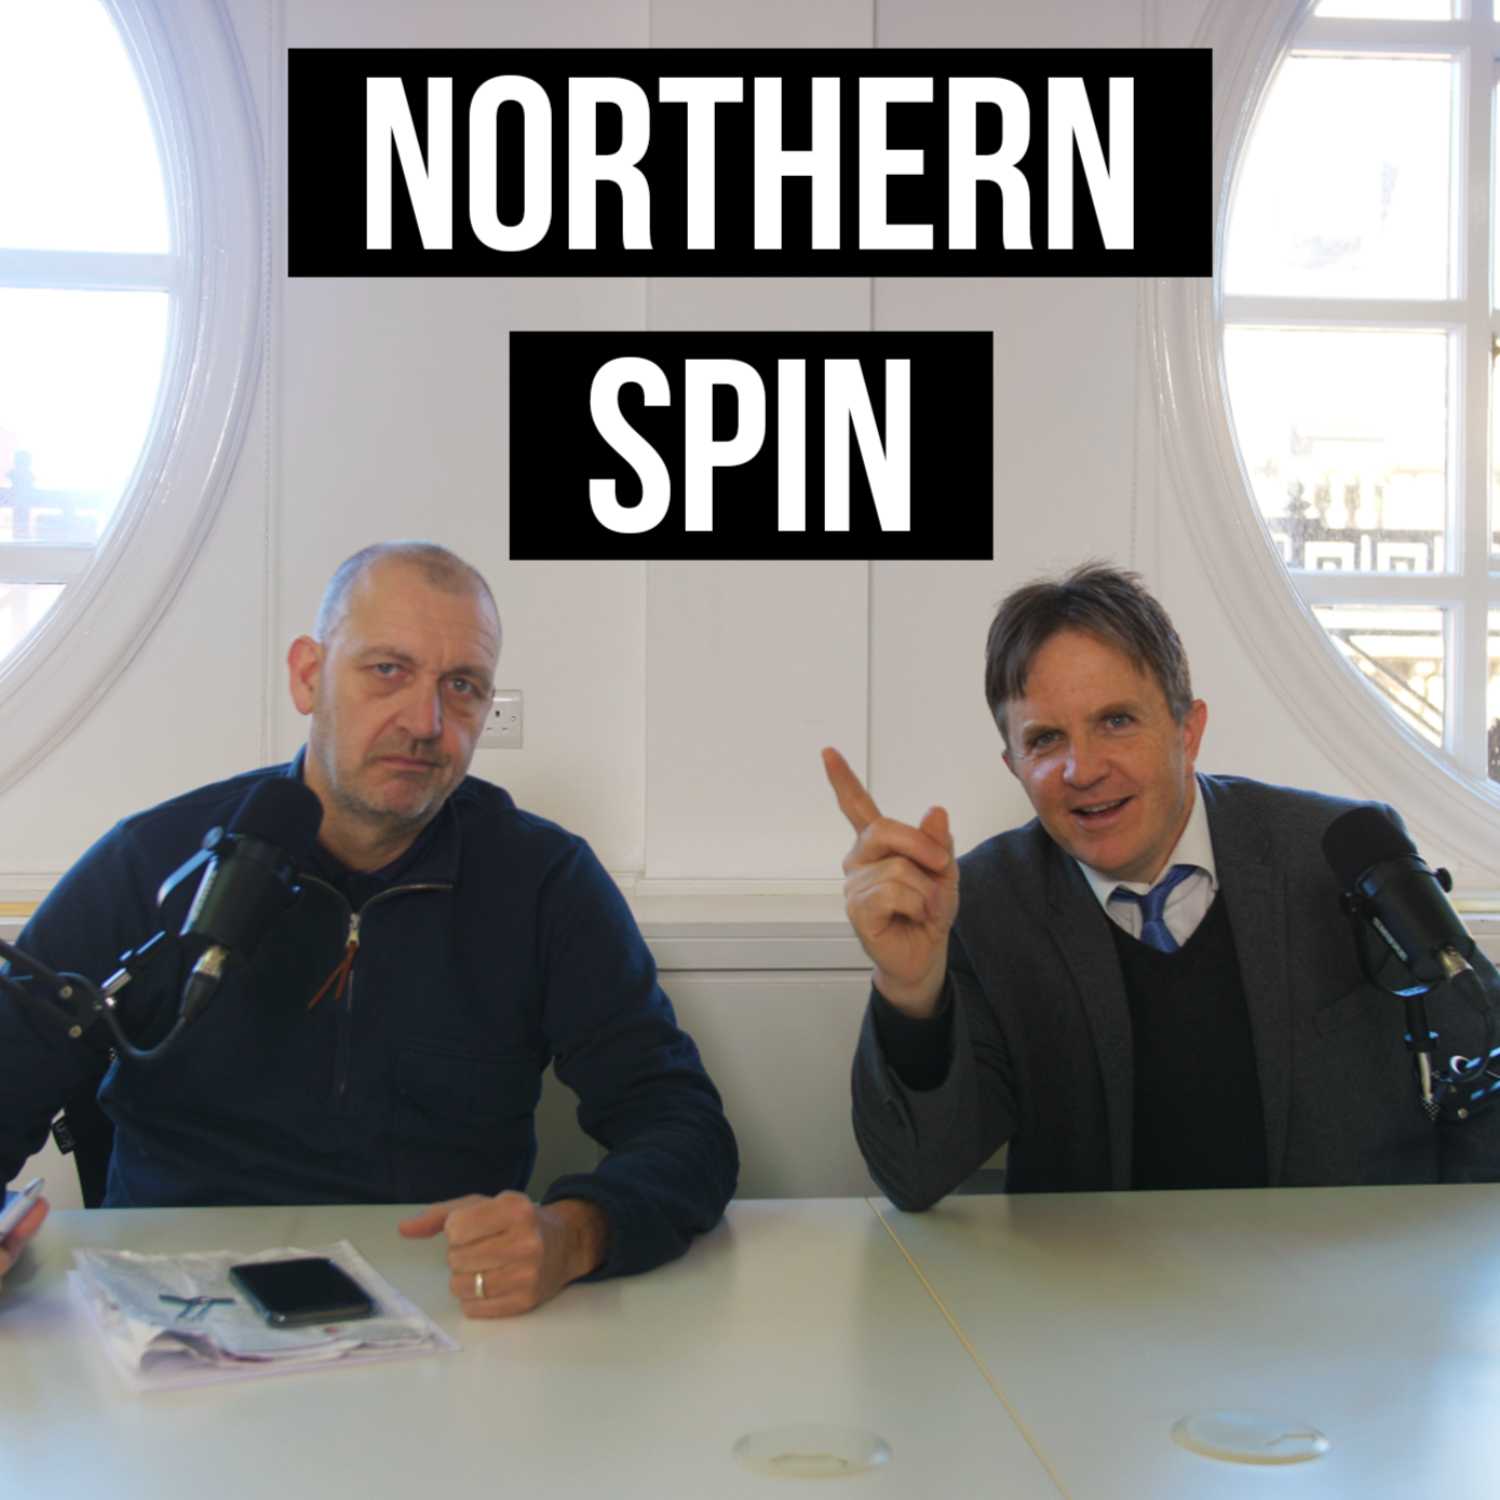 Northern Spin - Season 5 - Episode 1: Labour Reshuffle and the Future of Journalism